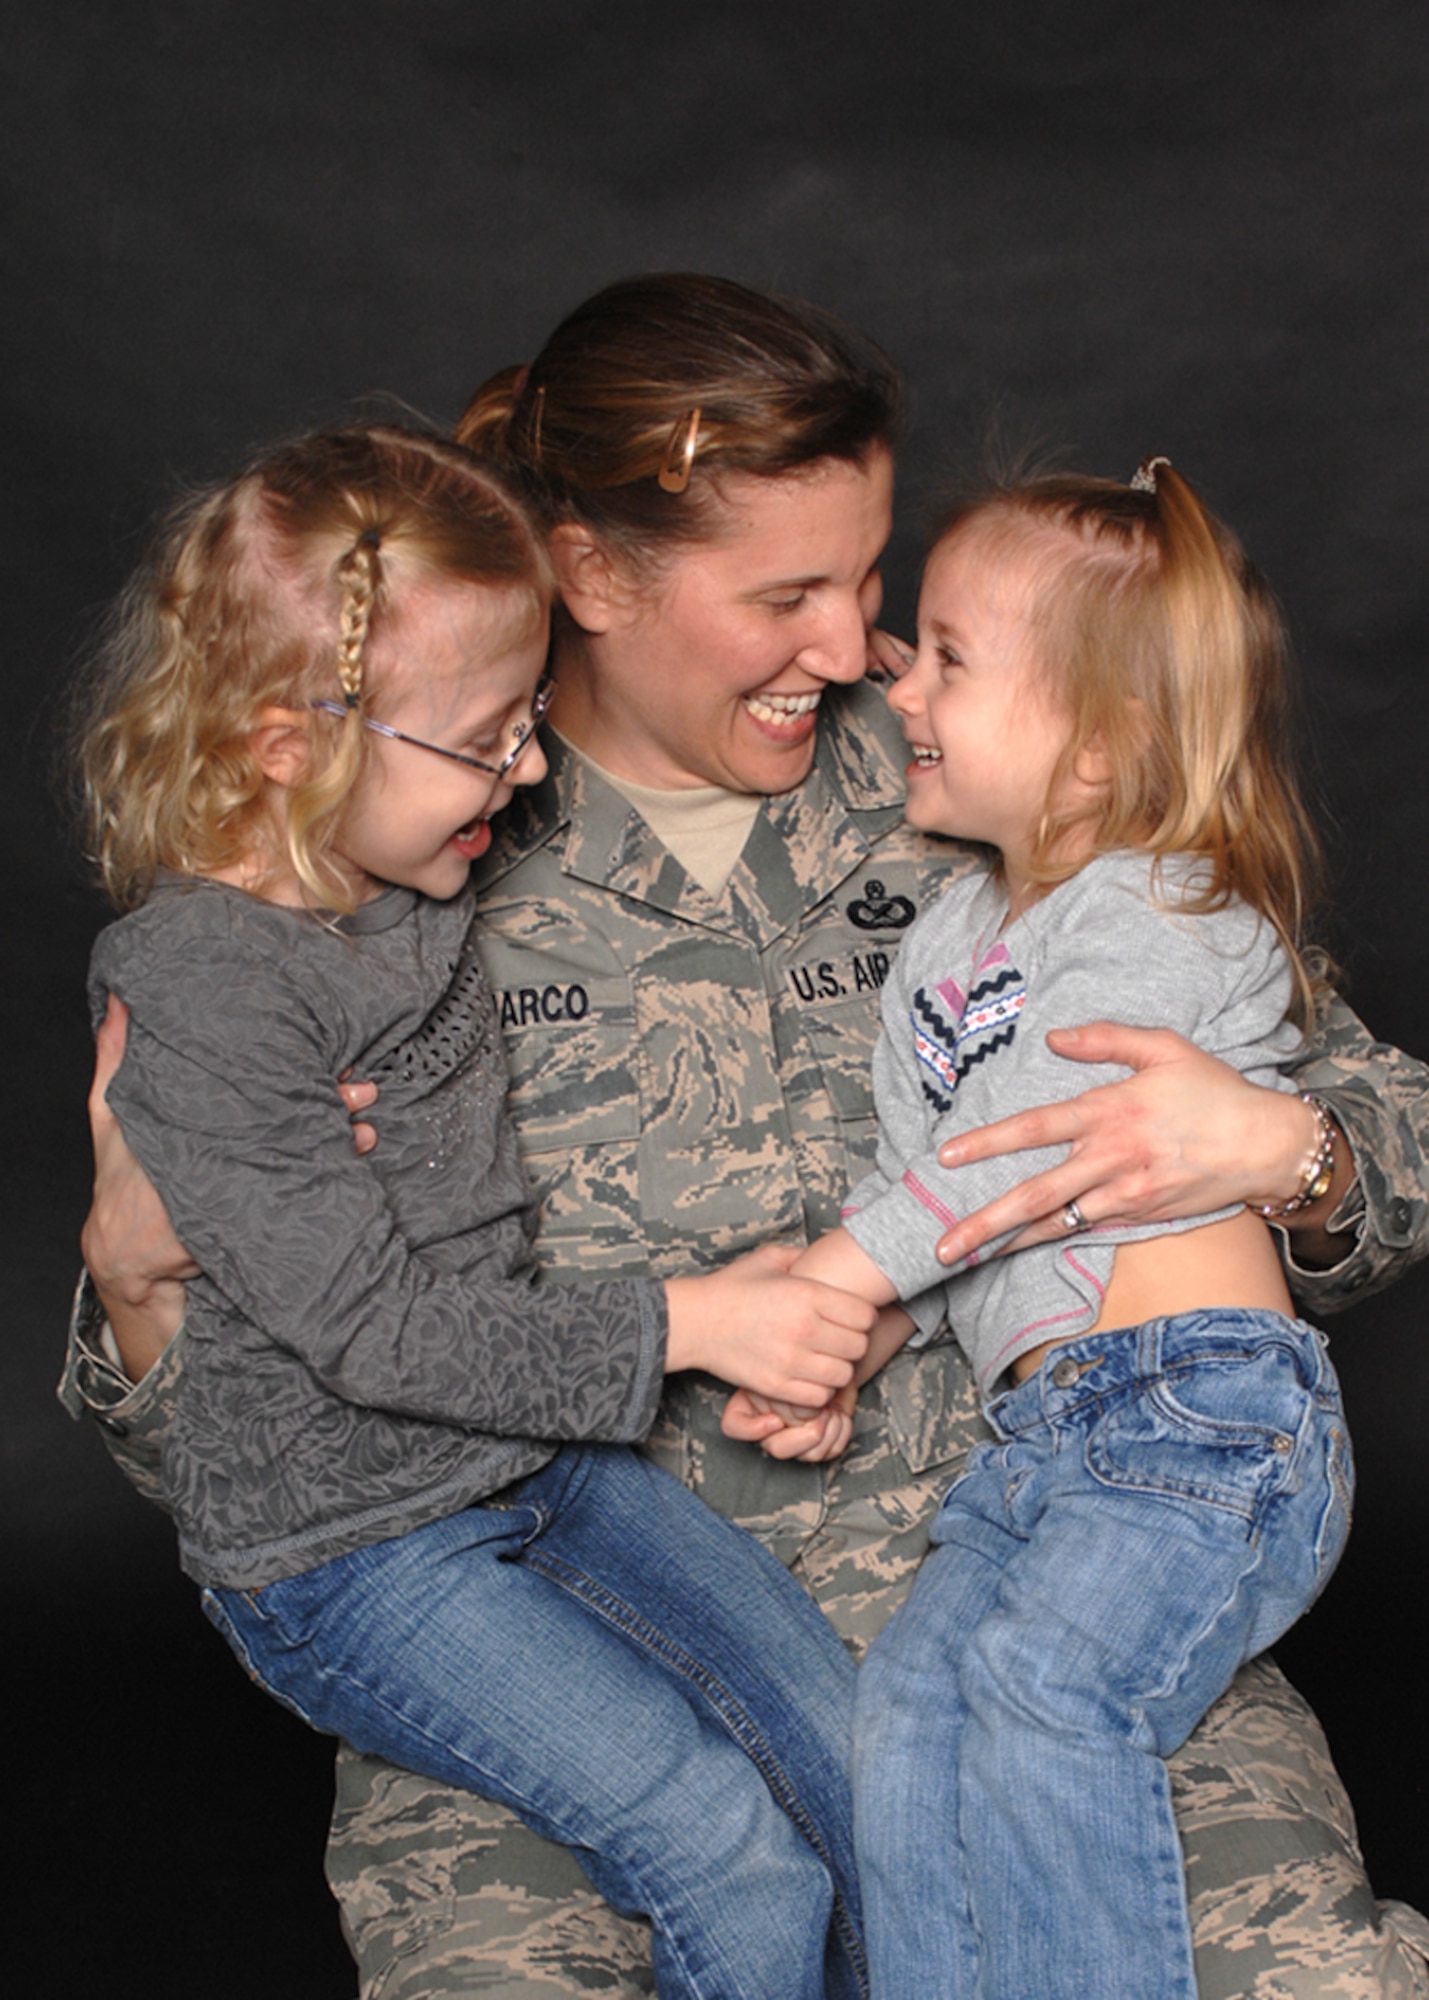 Master Sgt. Tracy DeMarco, with daughters Rachel (left), and Chloe. Sergeant DeMarco shares her thoughts and personal experiences on being a deployed mother in her commentary, "Deployed moms, every MAJCOM has them" (U.S. Air Force photo/Staff Sgt. Jerry Fleshman)